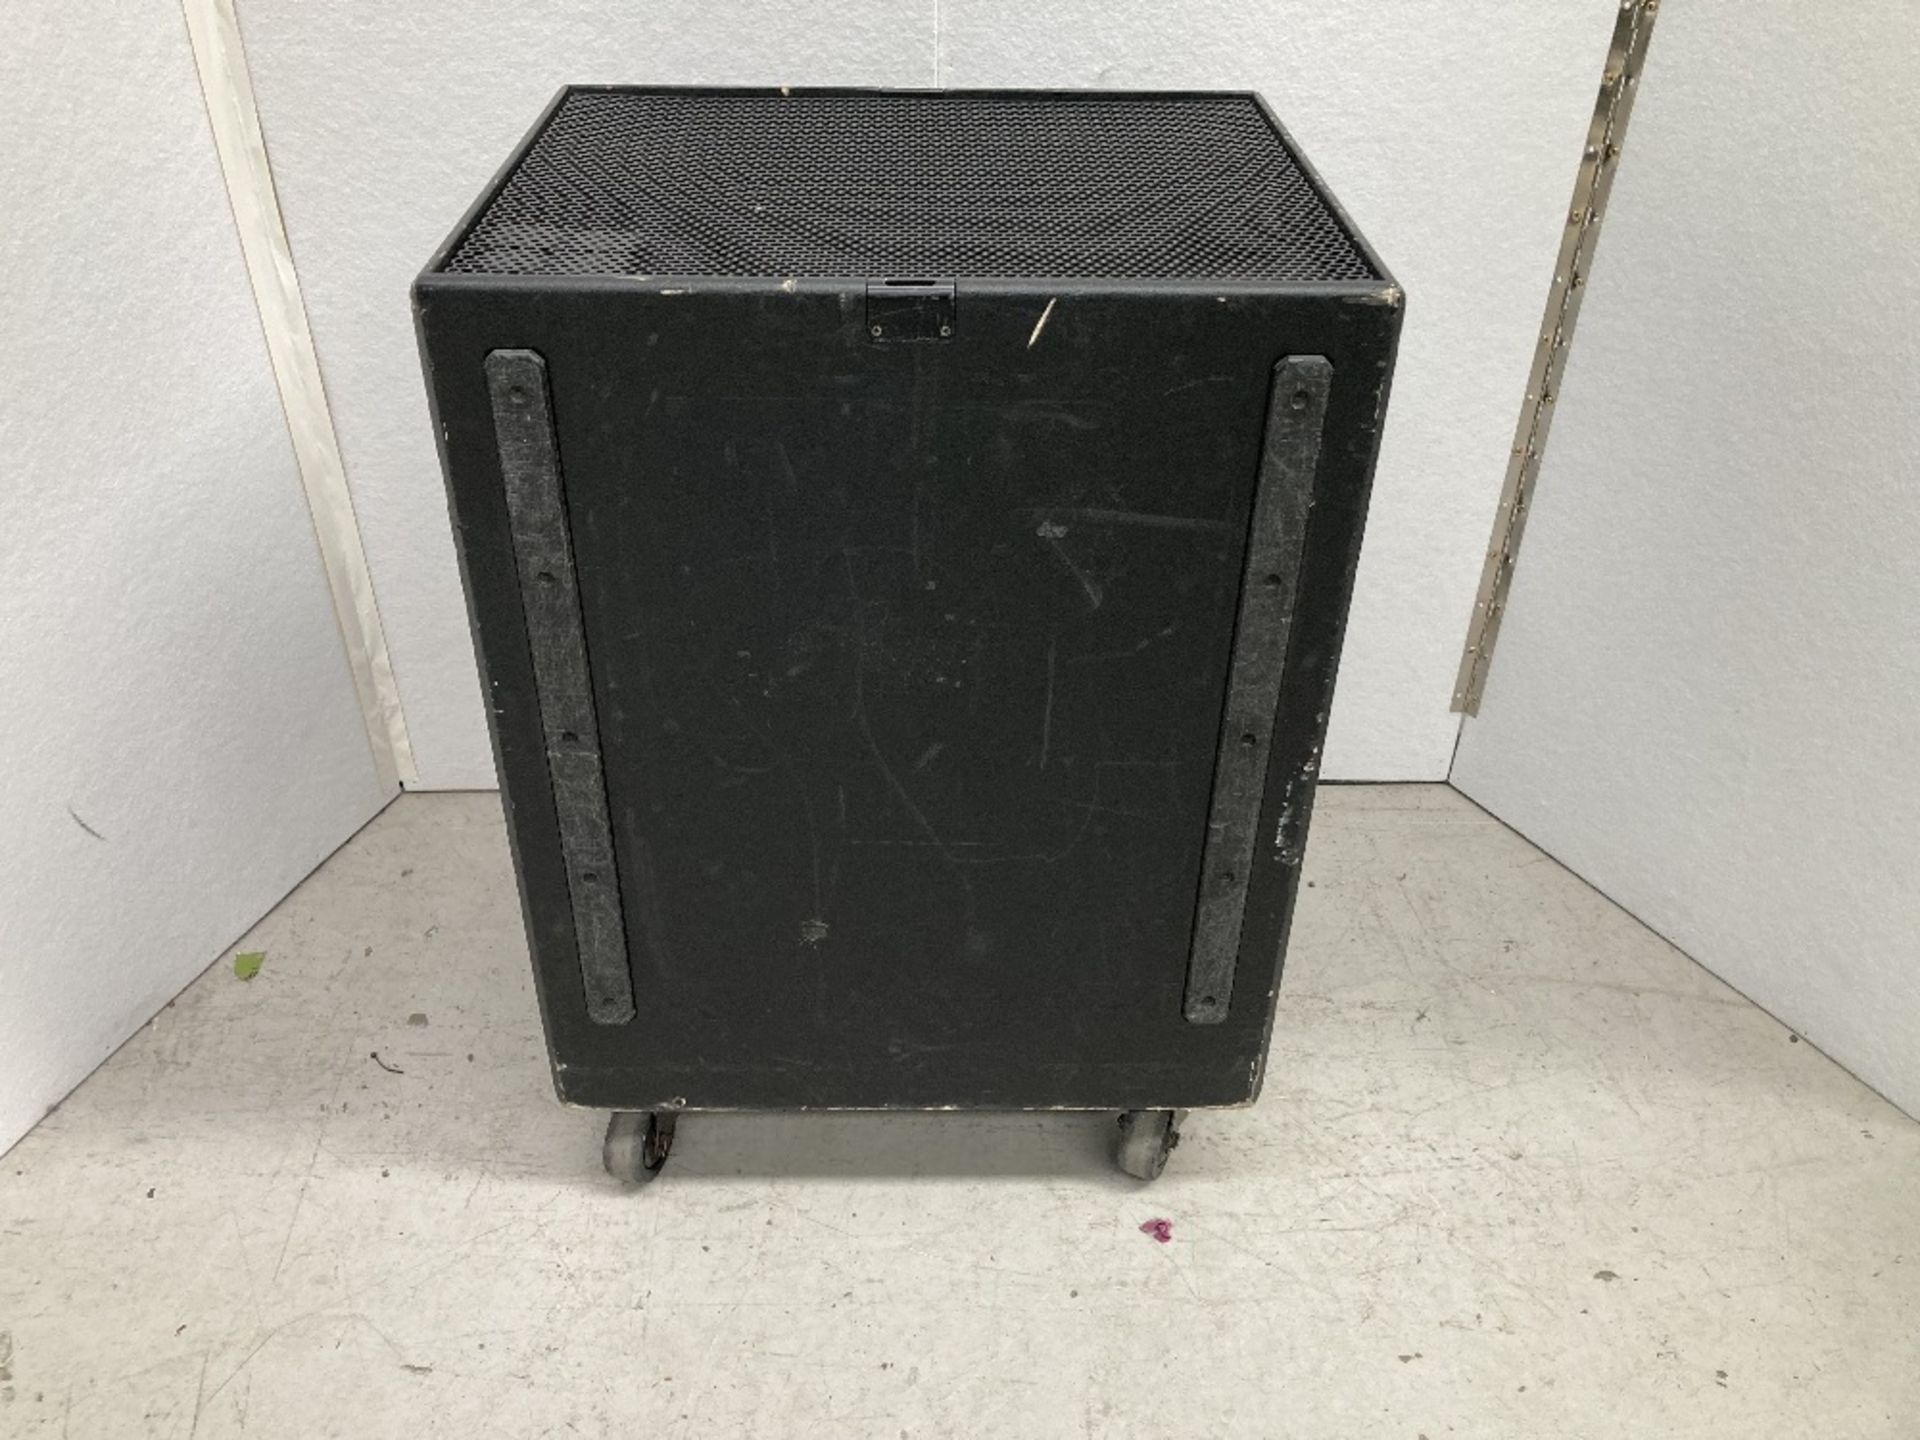 d&b B4 Subwoofer Mounted on Wheels